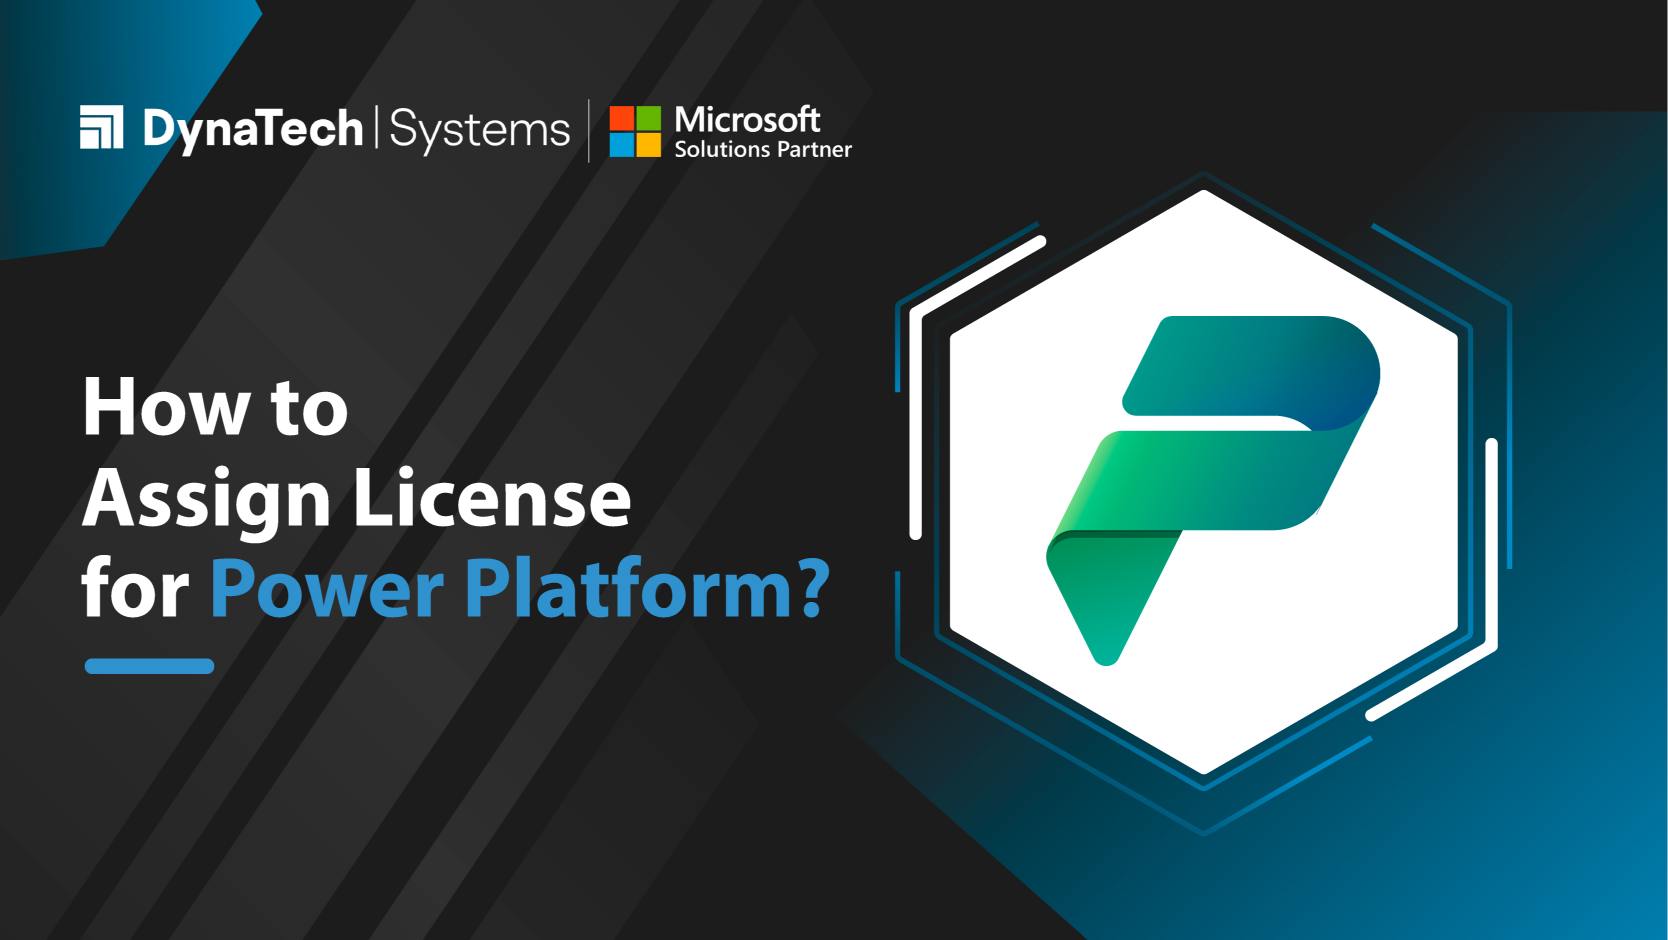 How to Assign License for Power Platform